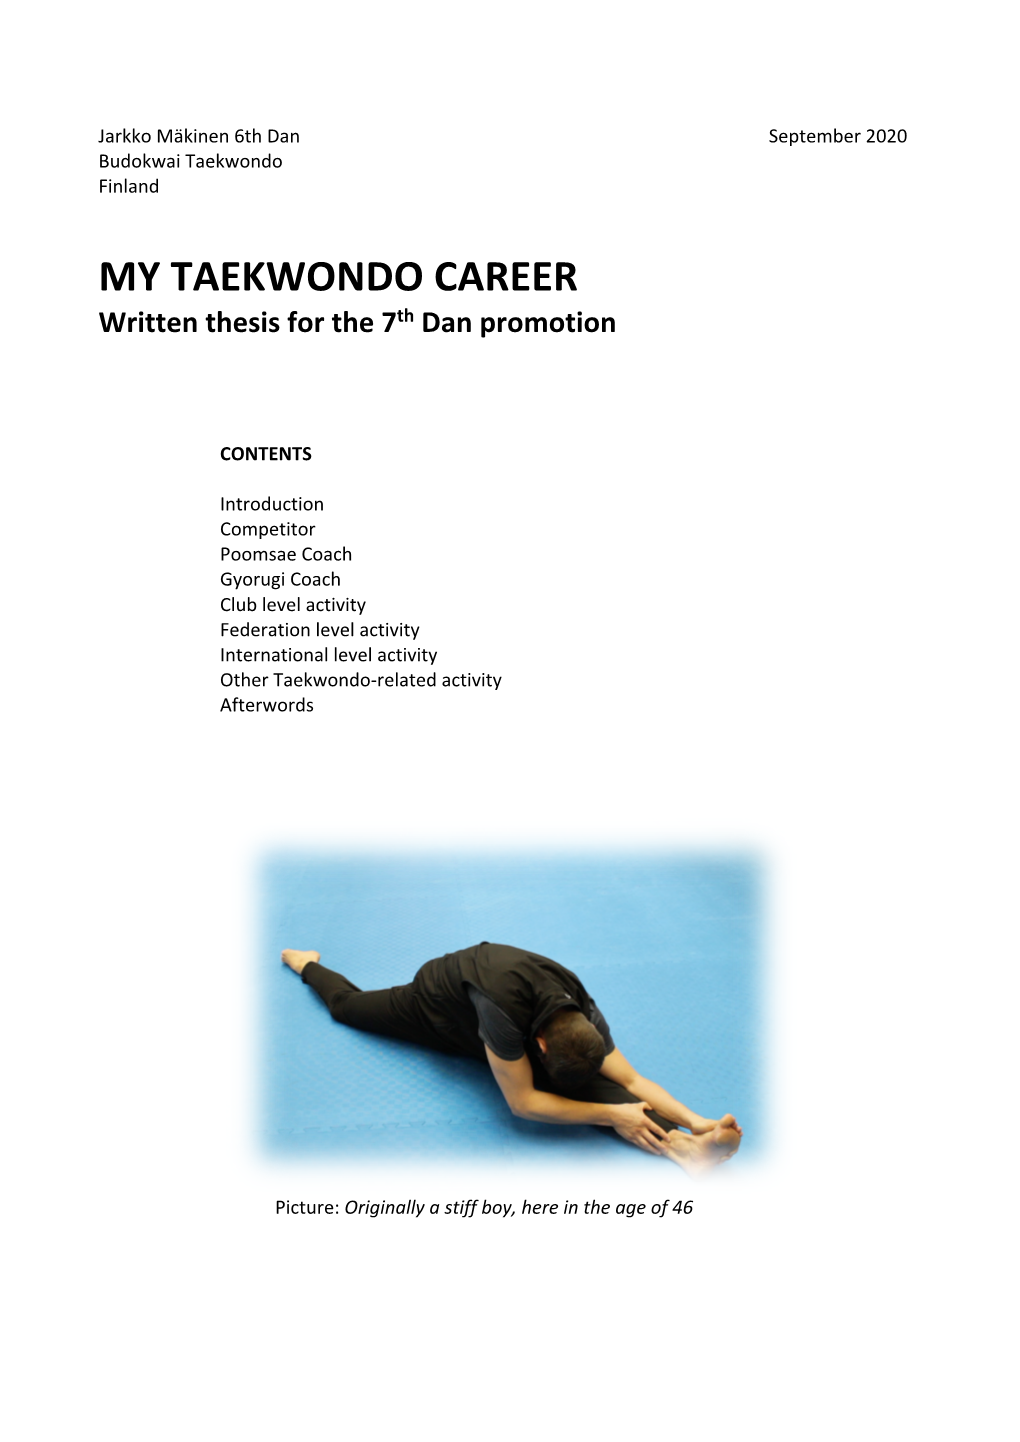 MY TAEKWONDO CAREER Written Thesis for the 7Th Dan Promotion